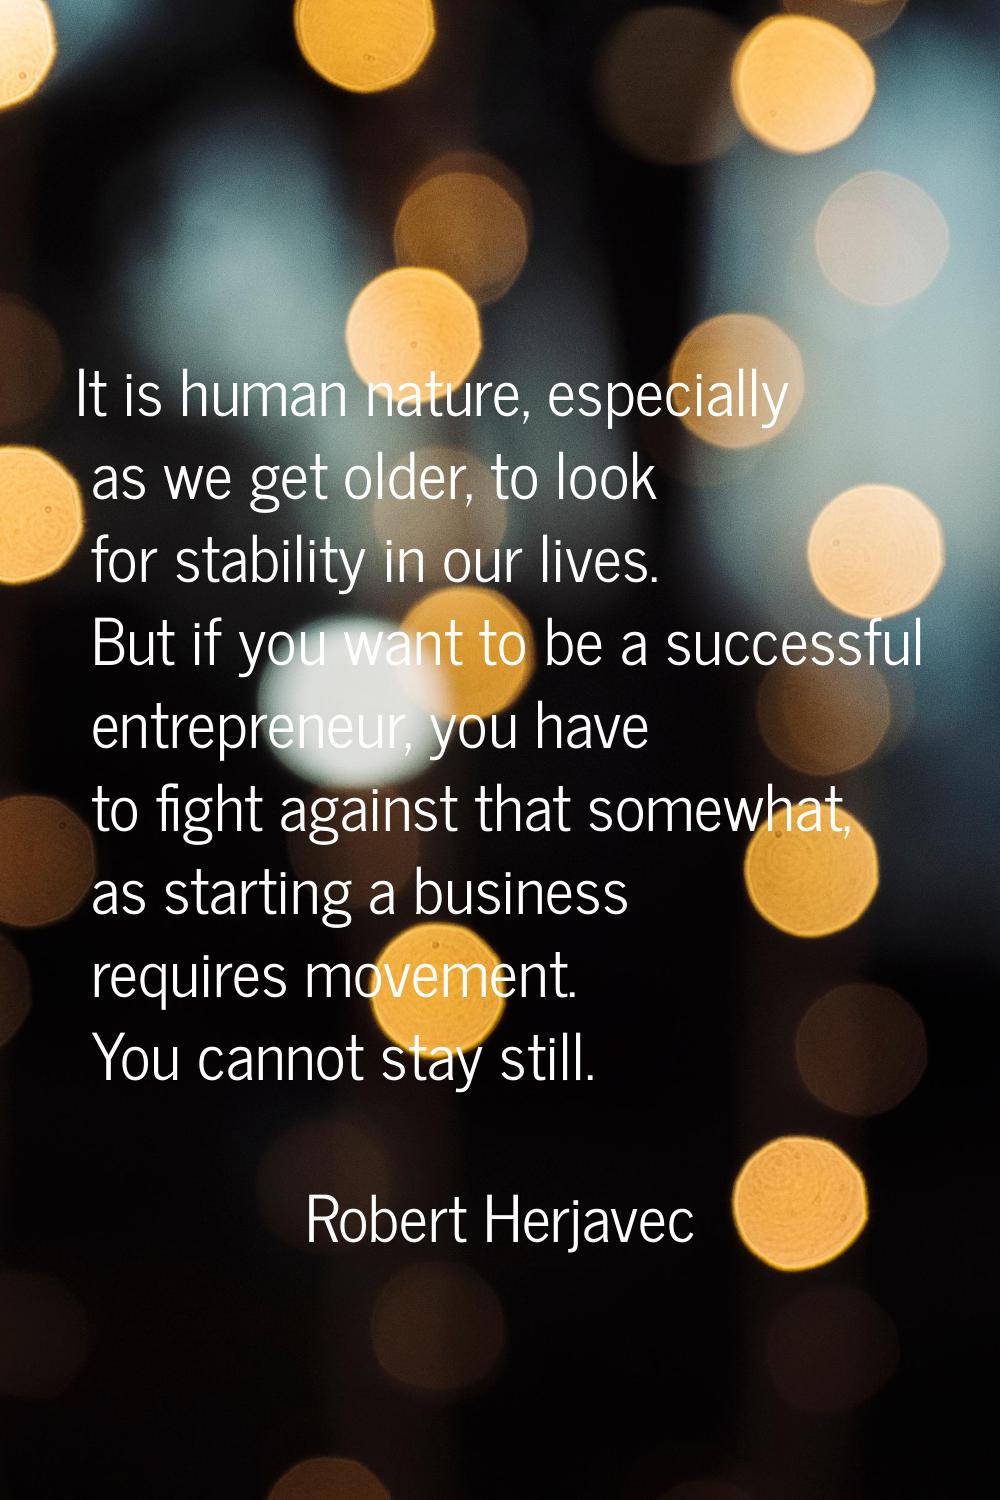 It is human nature, especially as we get older, to look for stability in our lives. But if you want